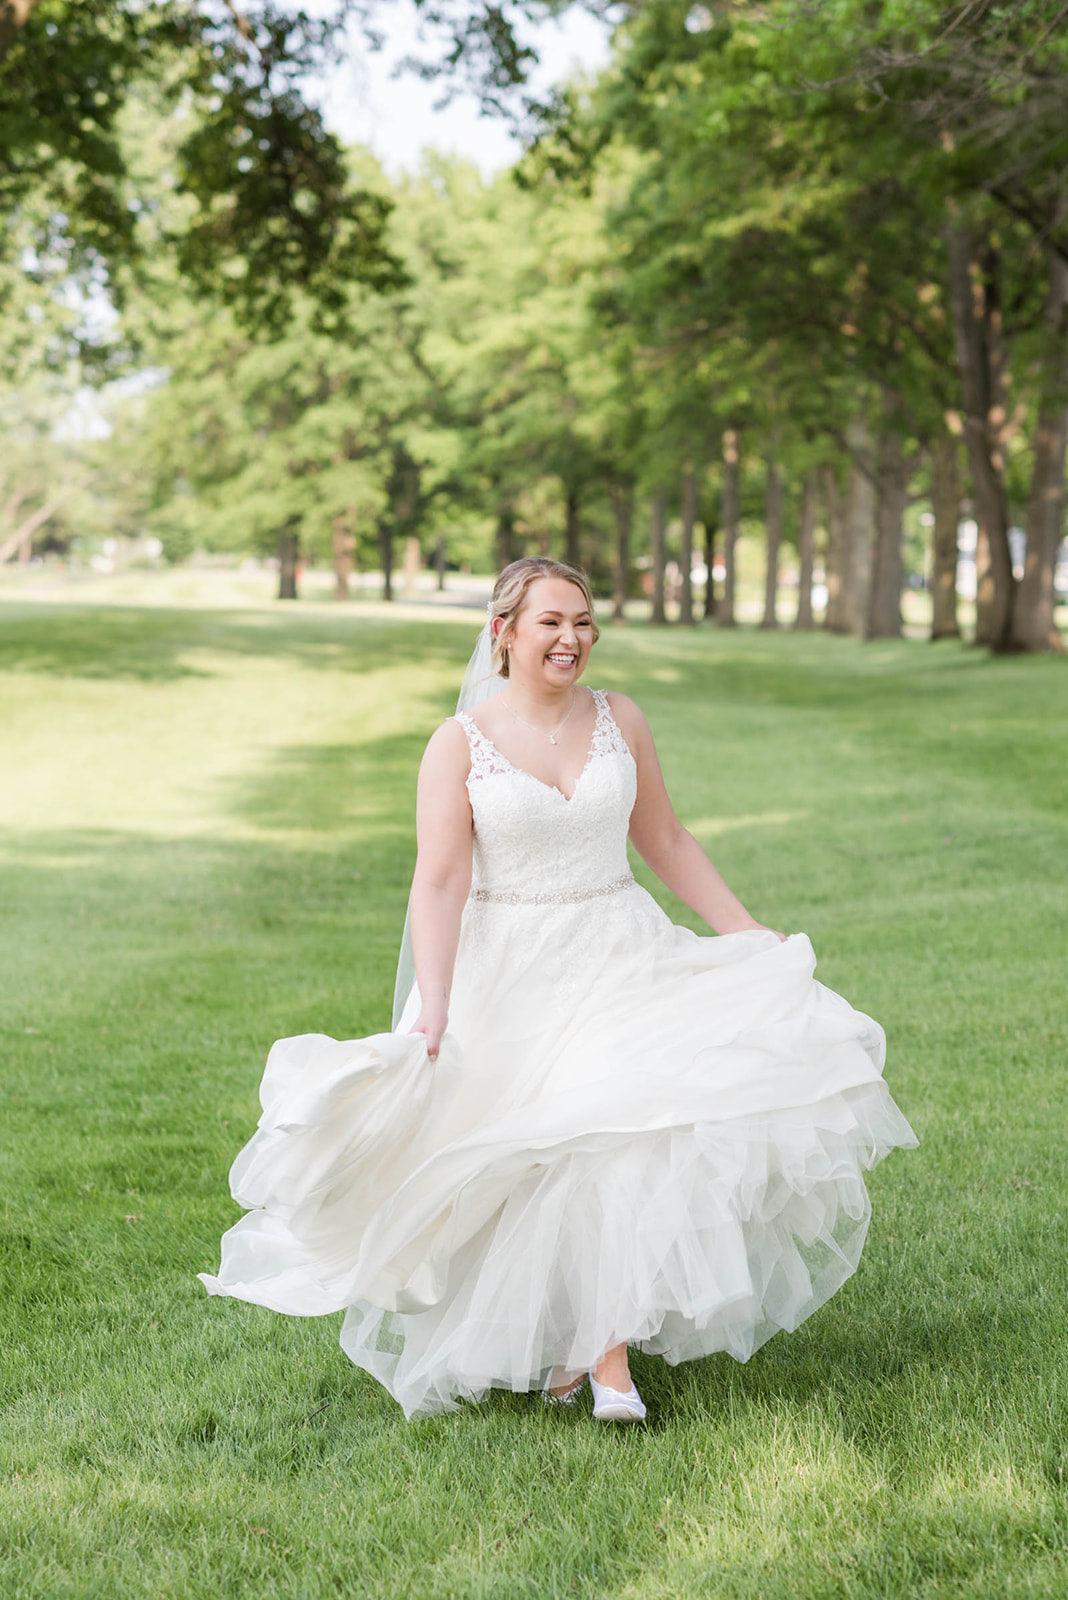 Wedding at Worthington Hills Country Club, Worthington, Ohio Sweet Williams Photography is a wedding and portrait photographer based in Nashville, Tennessee.